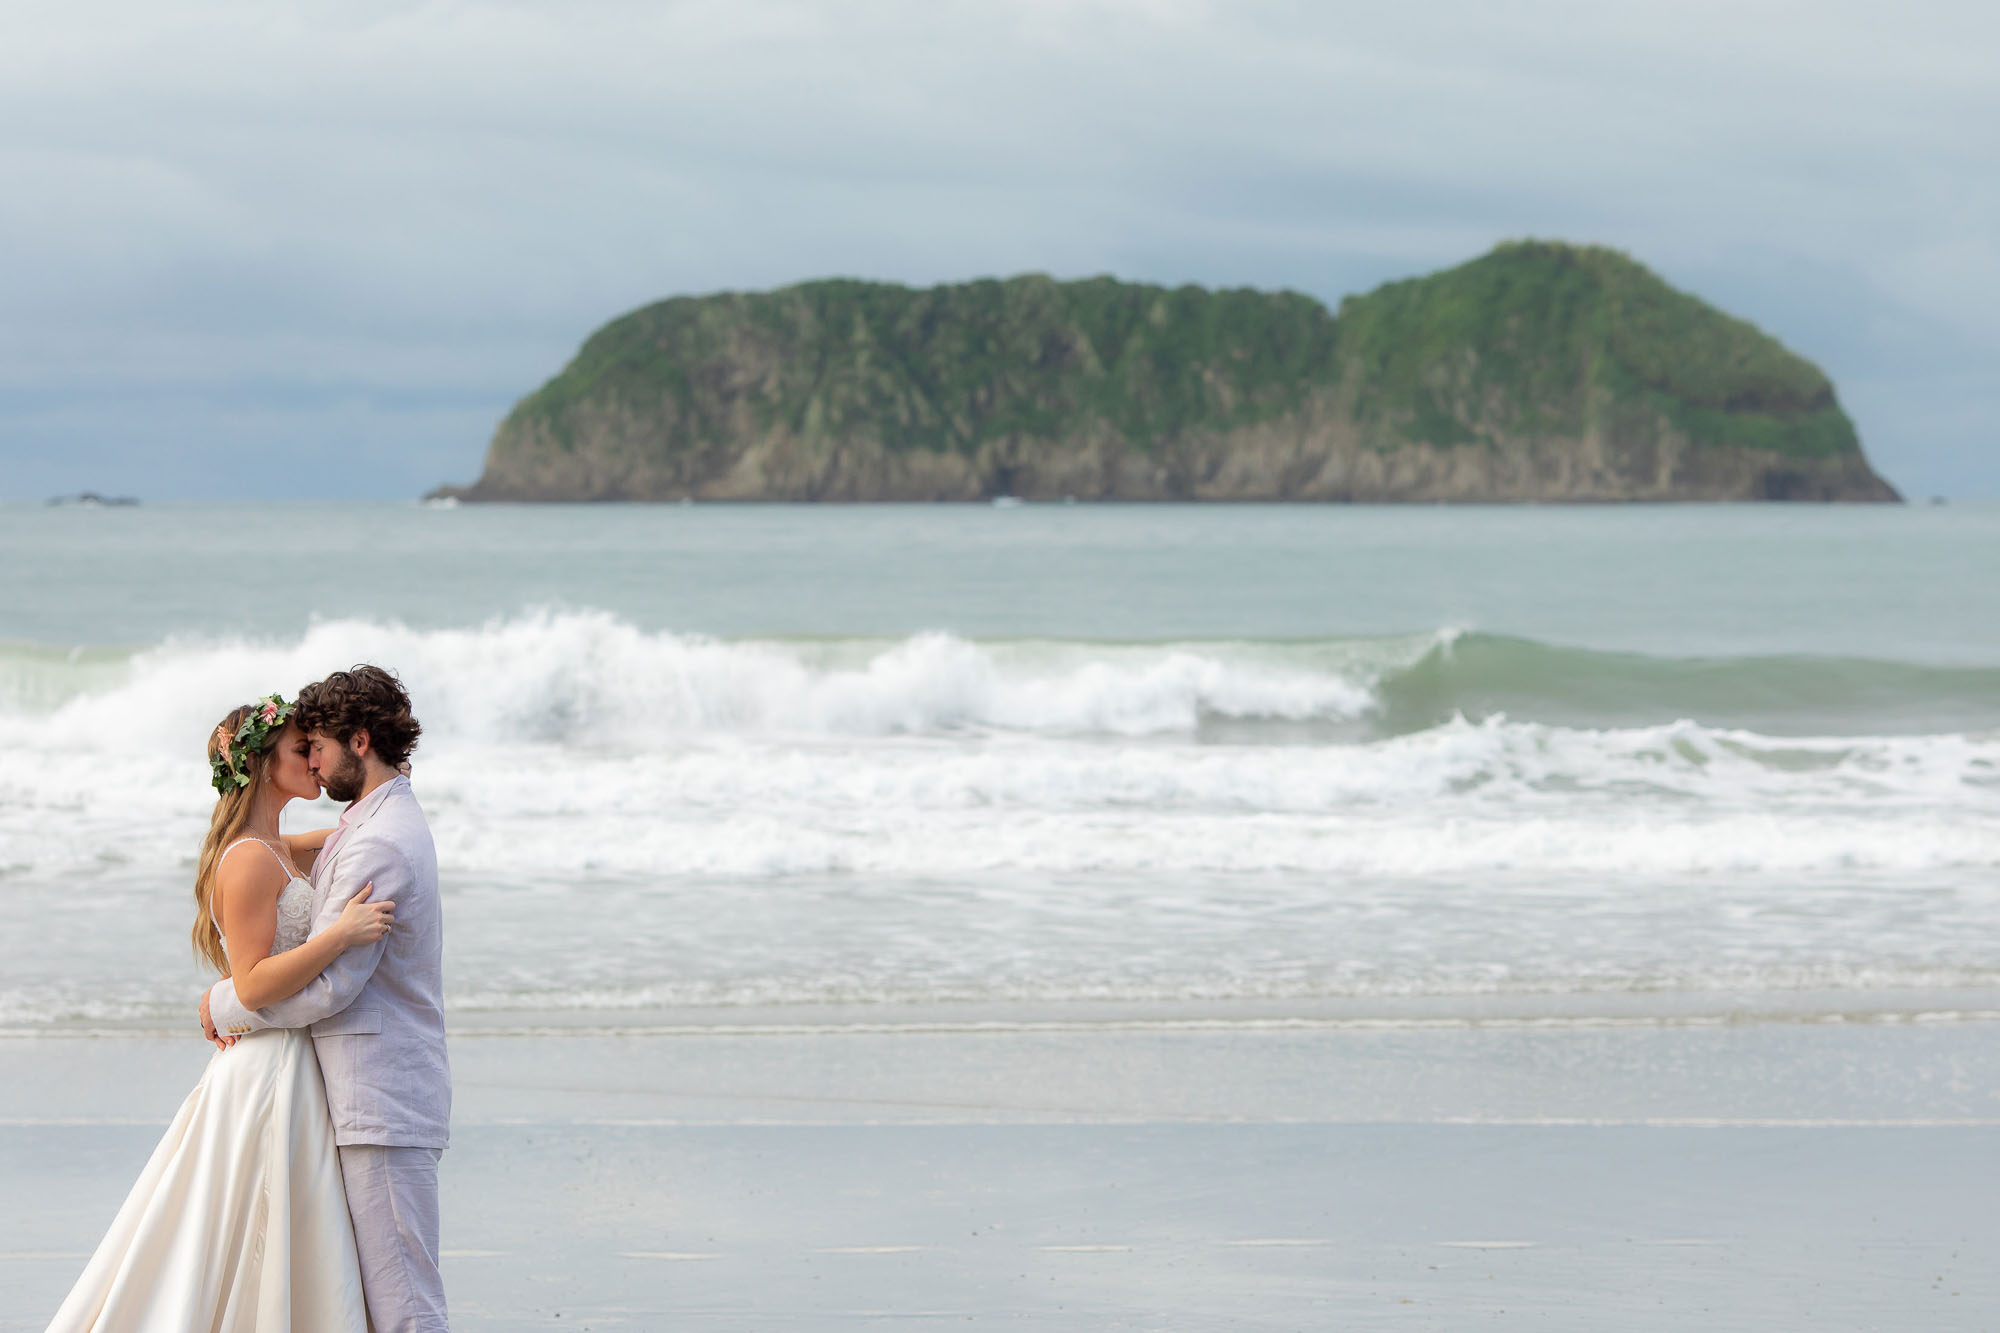 Photos of the bride and groom on the beach for a costa rica wedding getaway